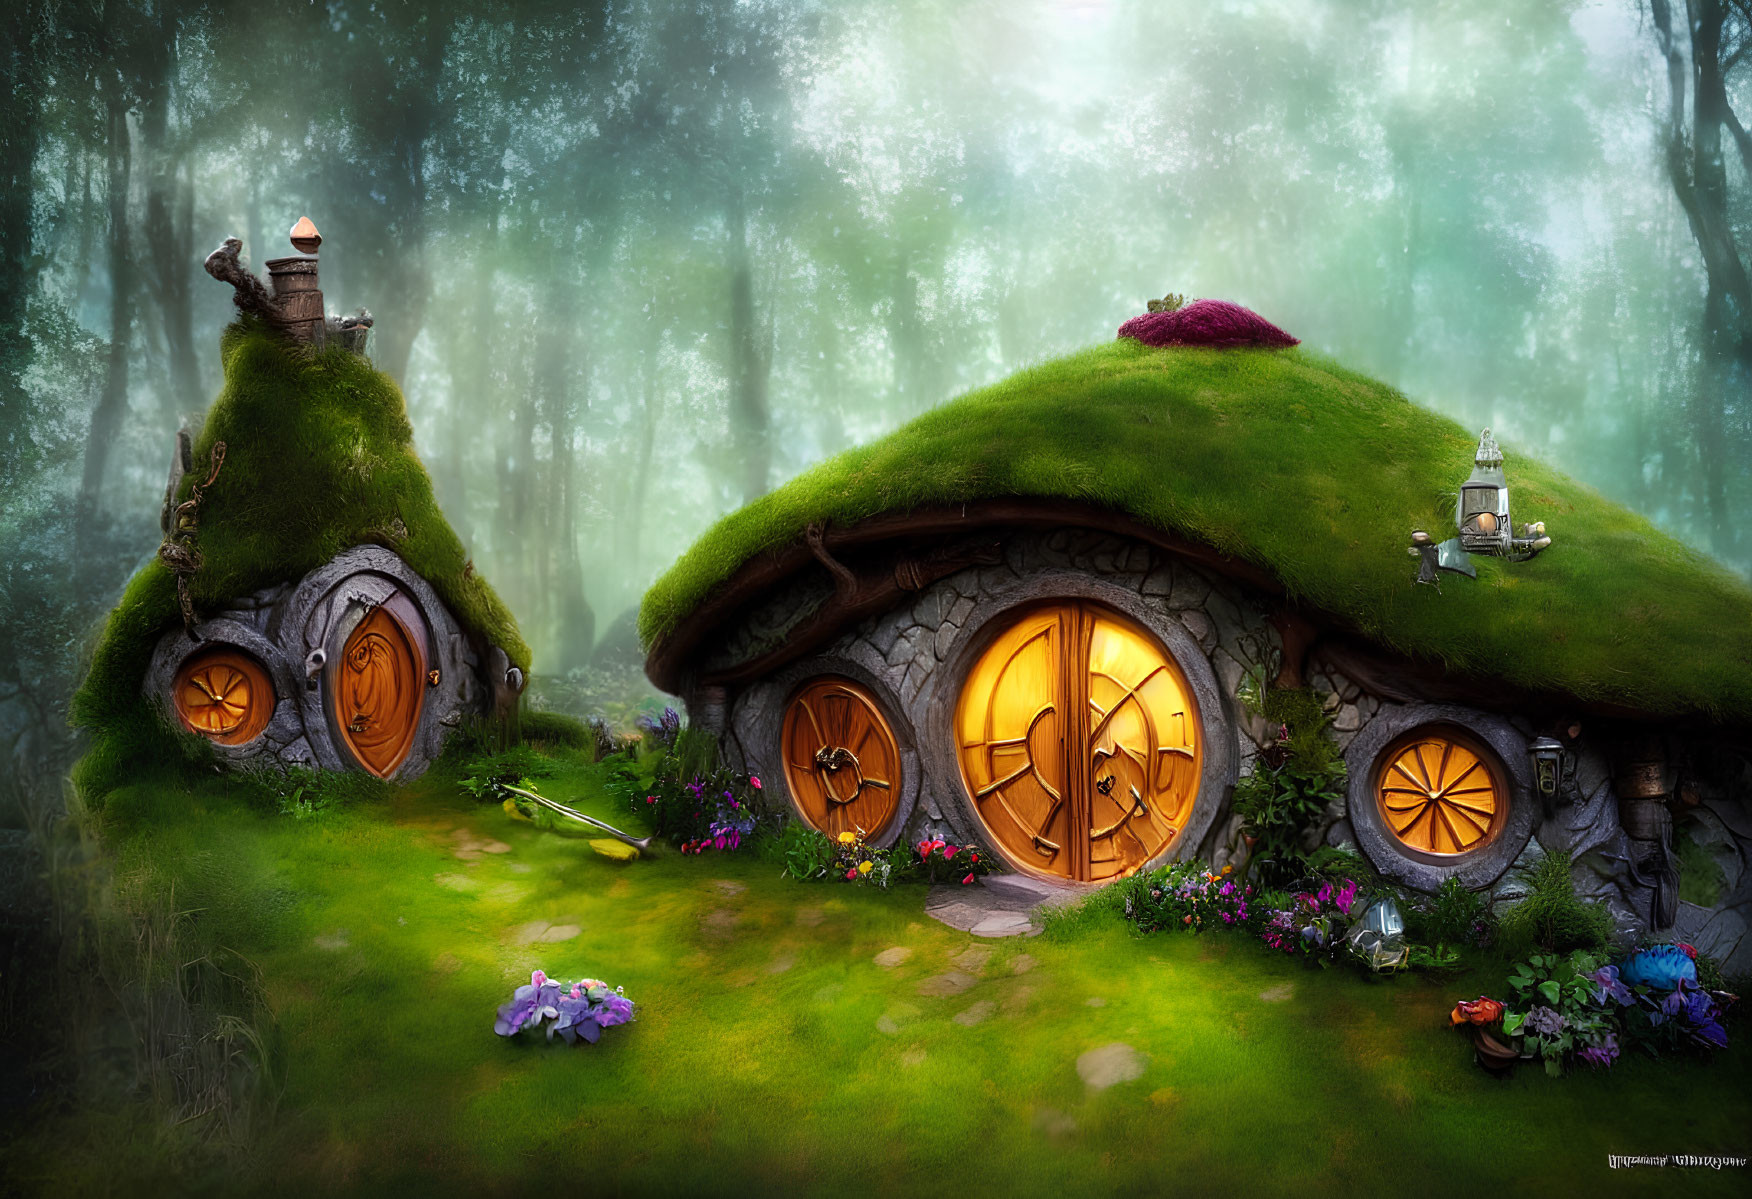 Enchanting forest scene with mushroom-shaped houses